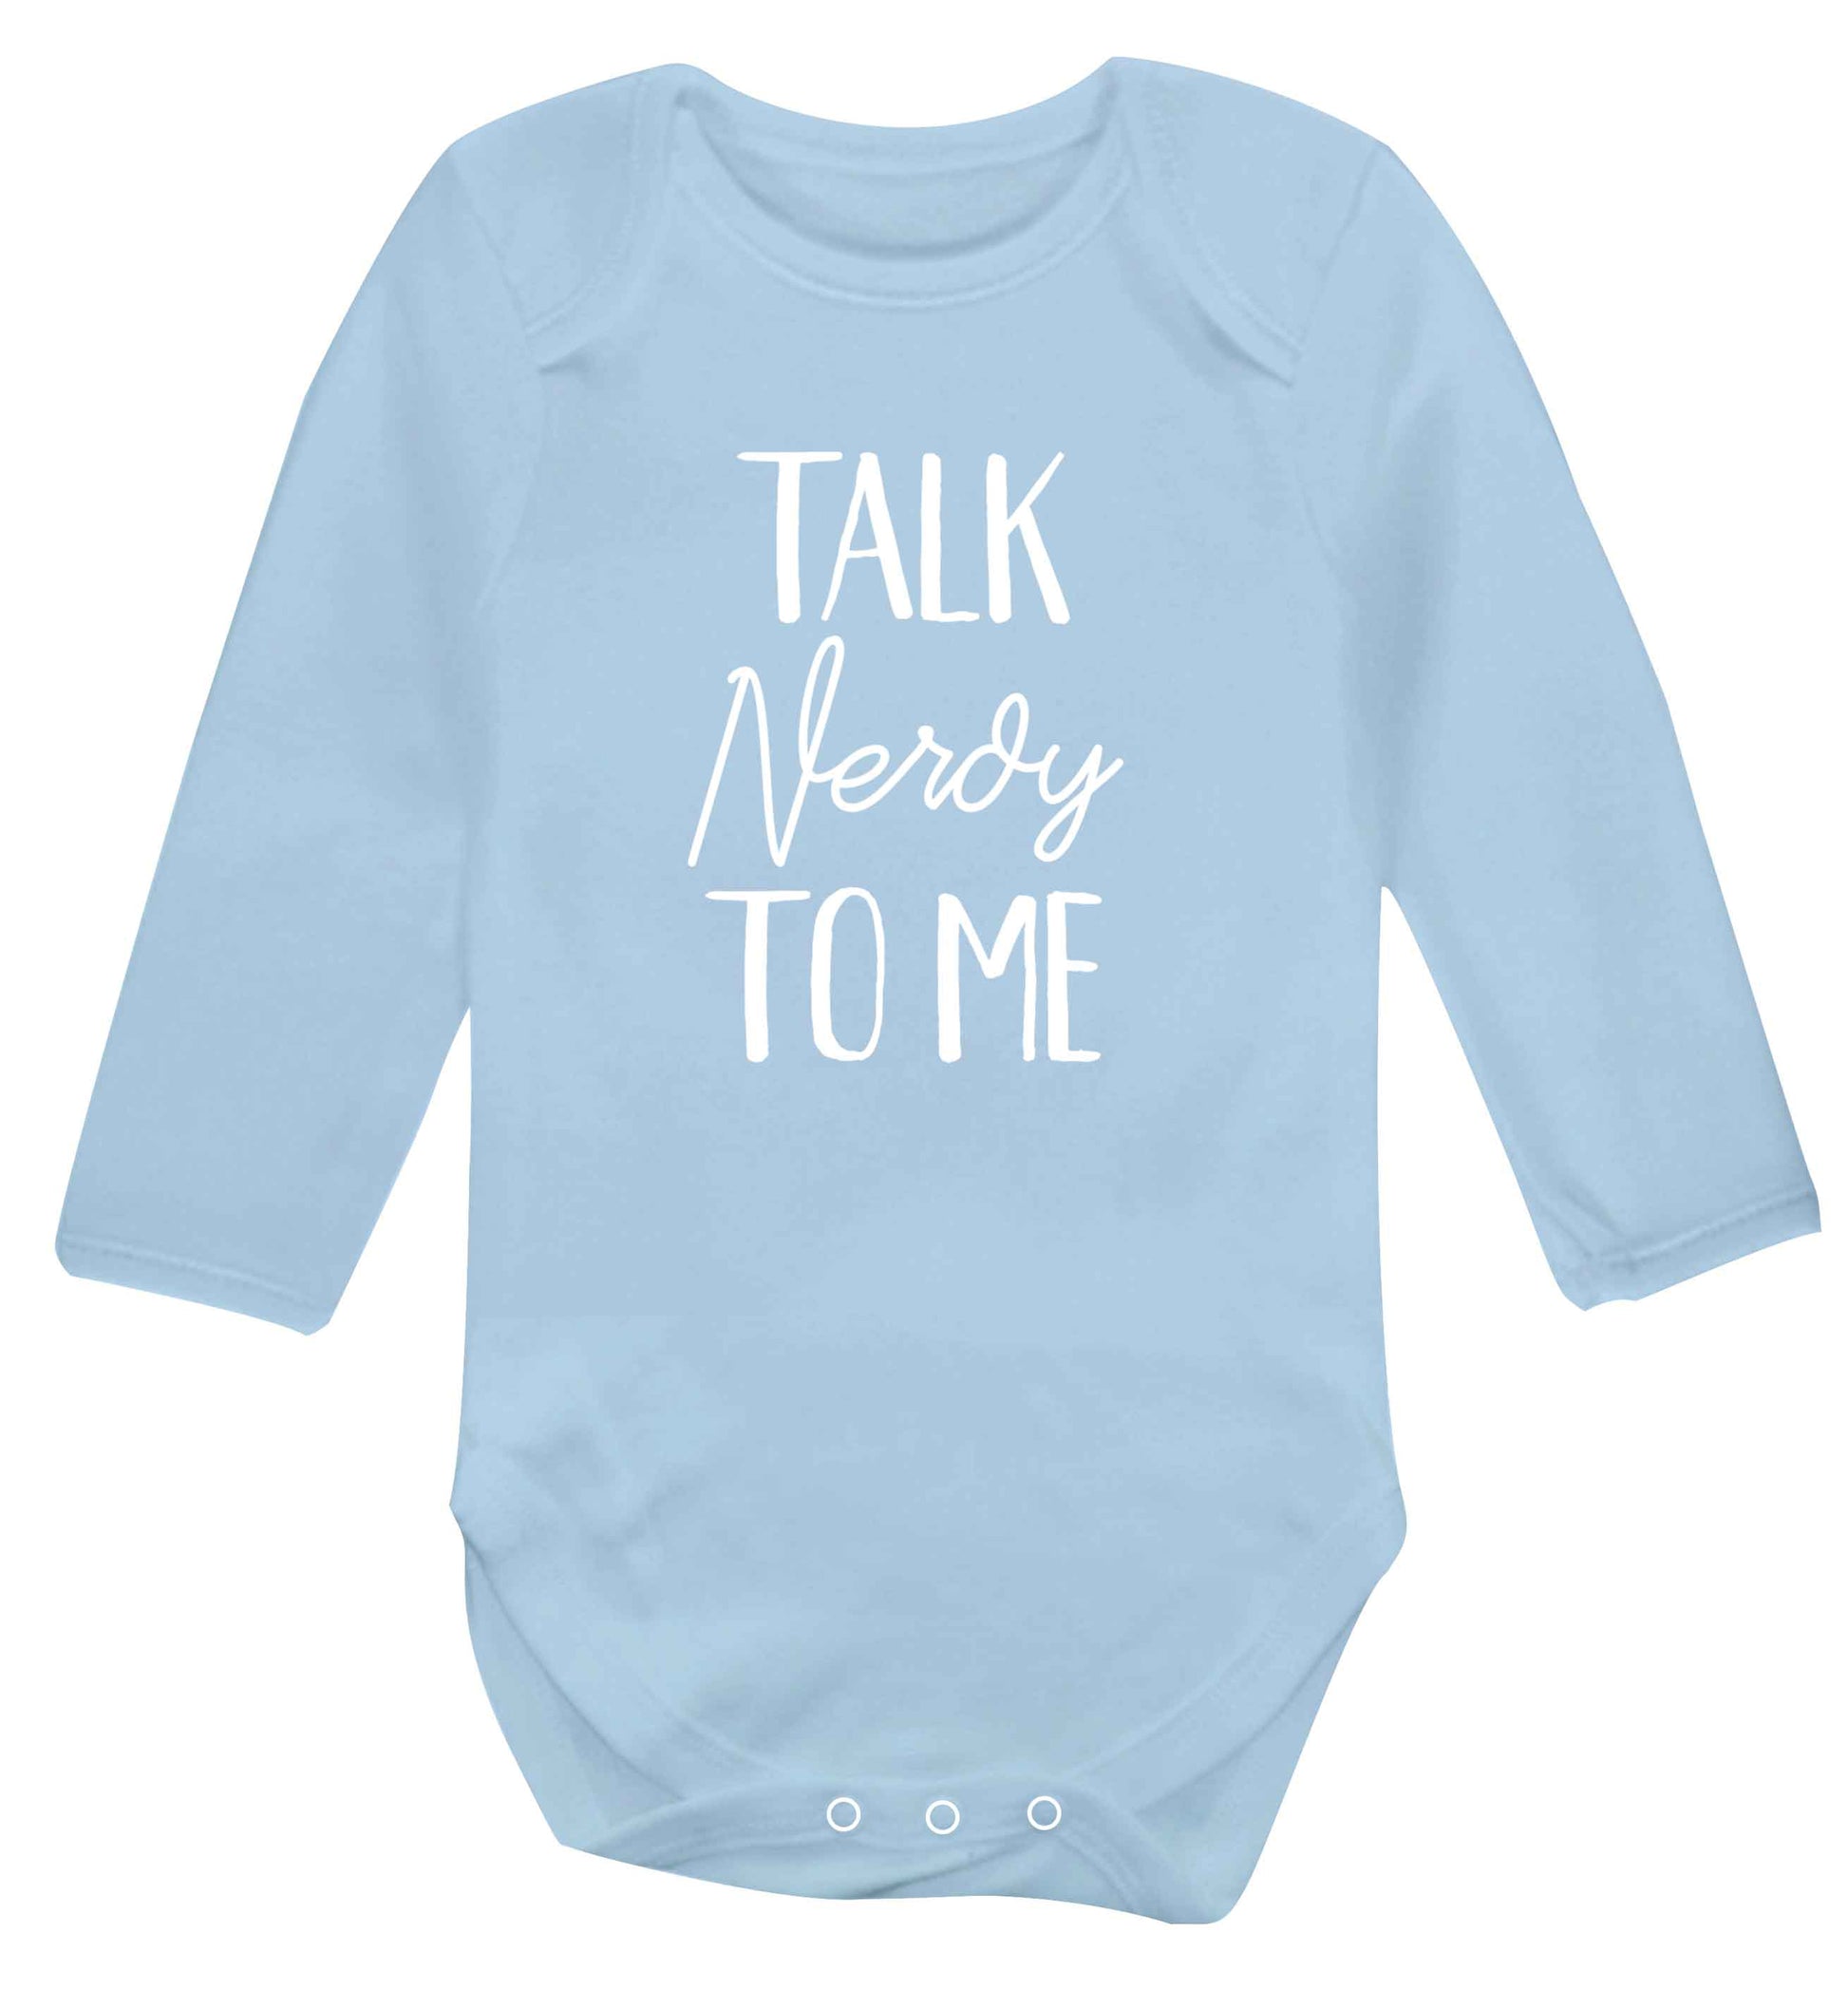 Talk nerdy to me baby vest long sleeved pale blue 6-12 months